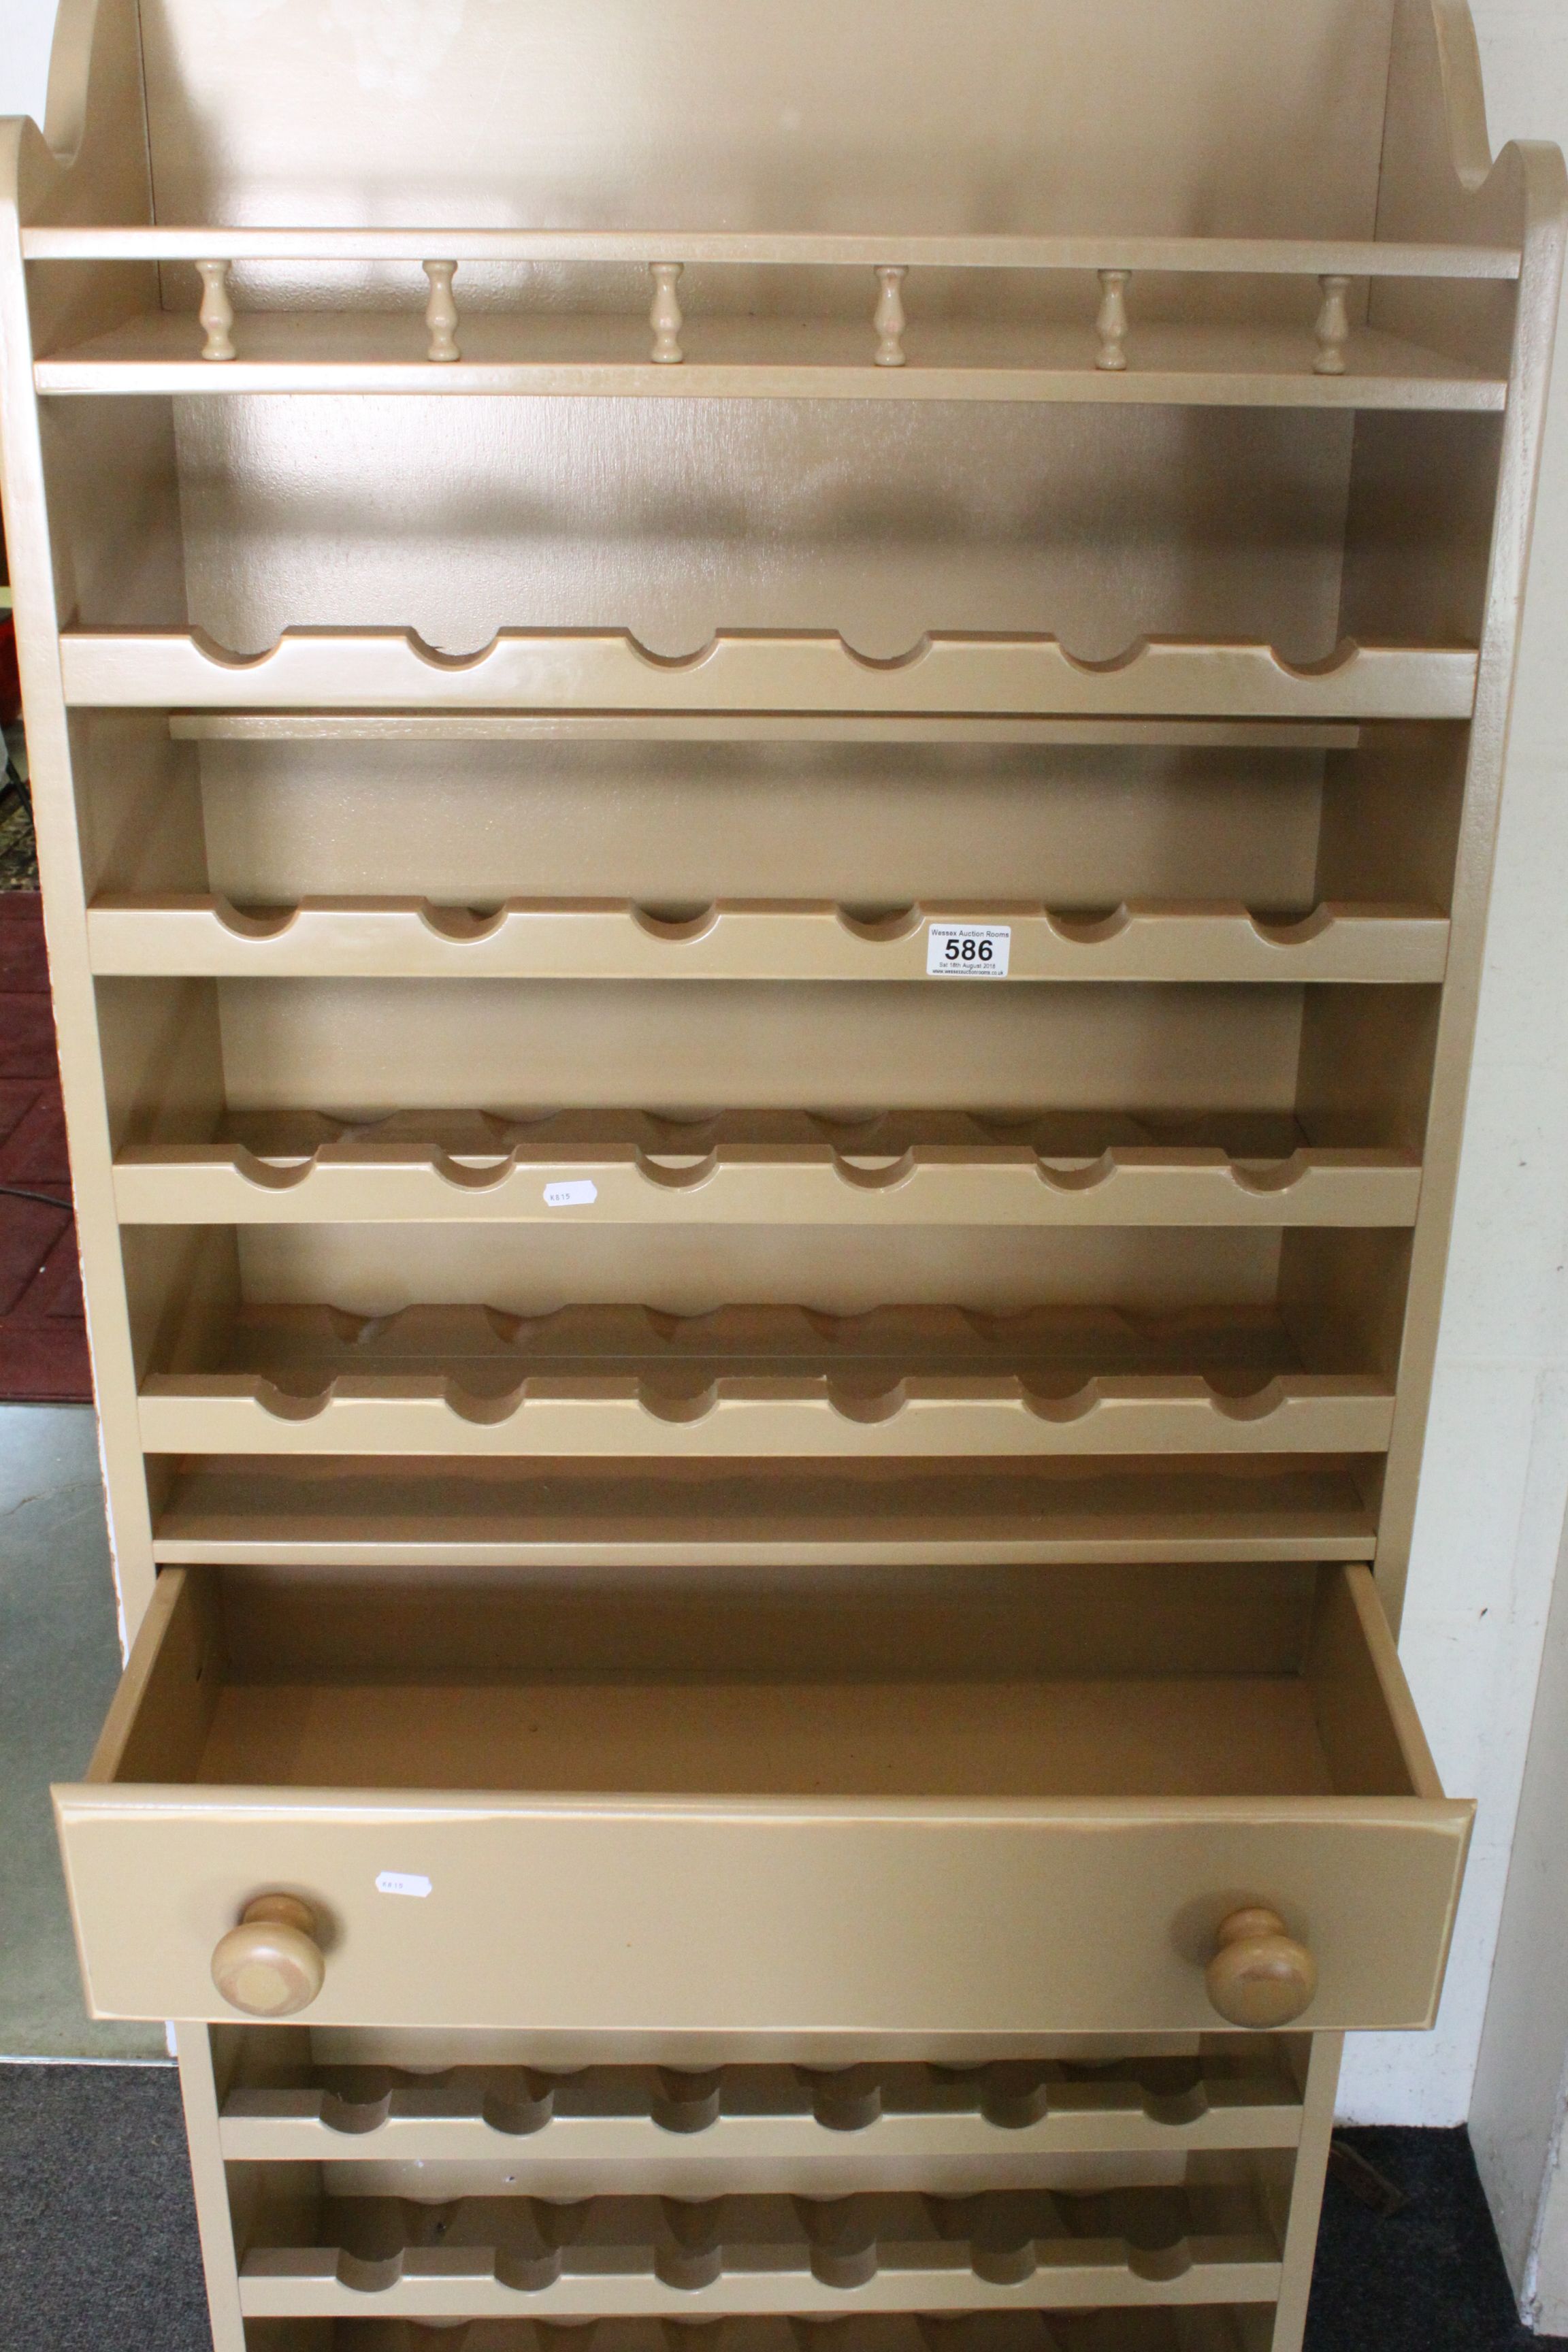 Contemporary 54 Wine Bottle Rack / Storage Unit with central drawer, approx. 169cm high x 68cm wide - Image 3 of 5